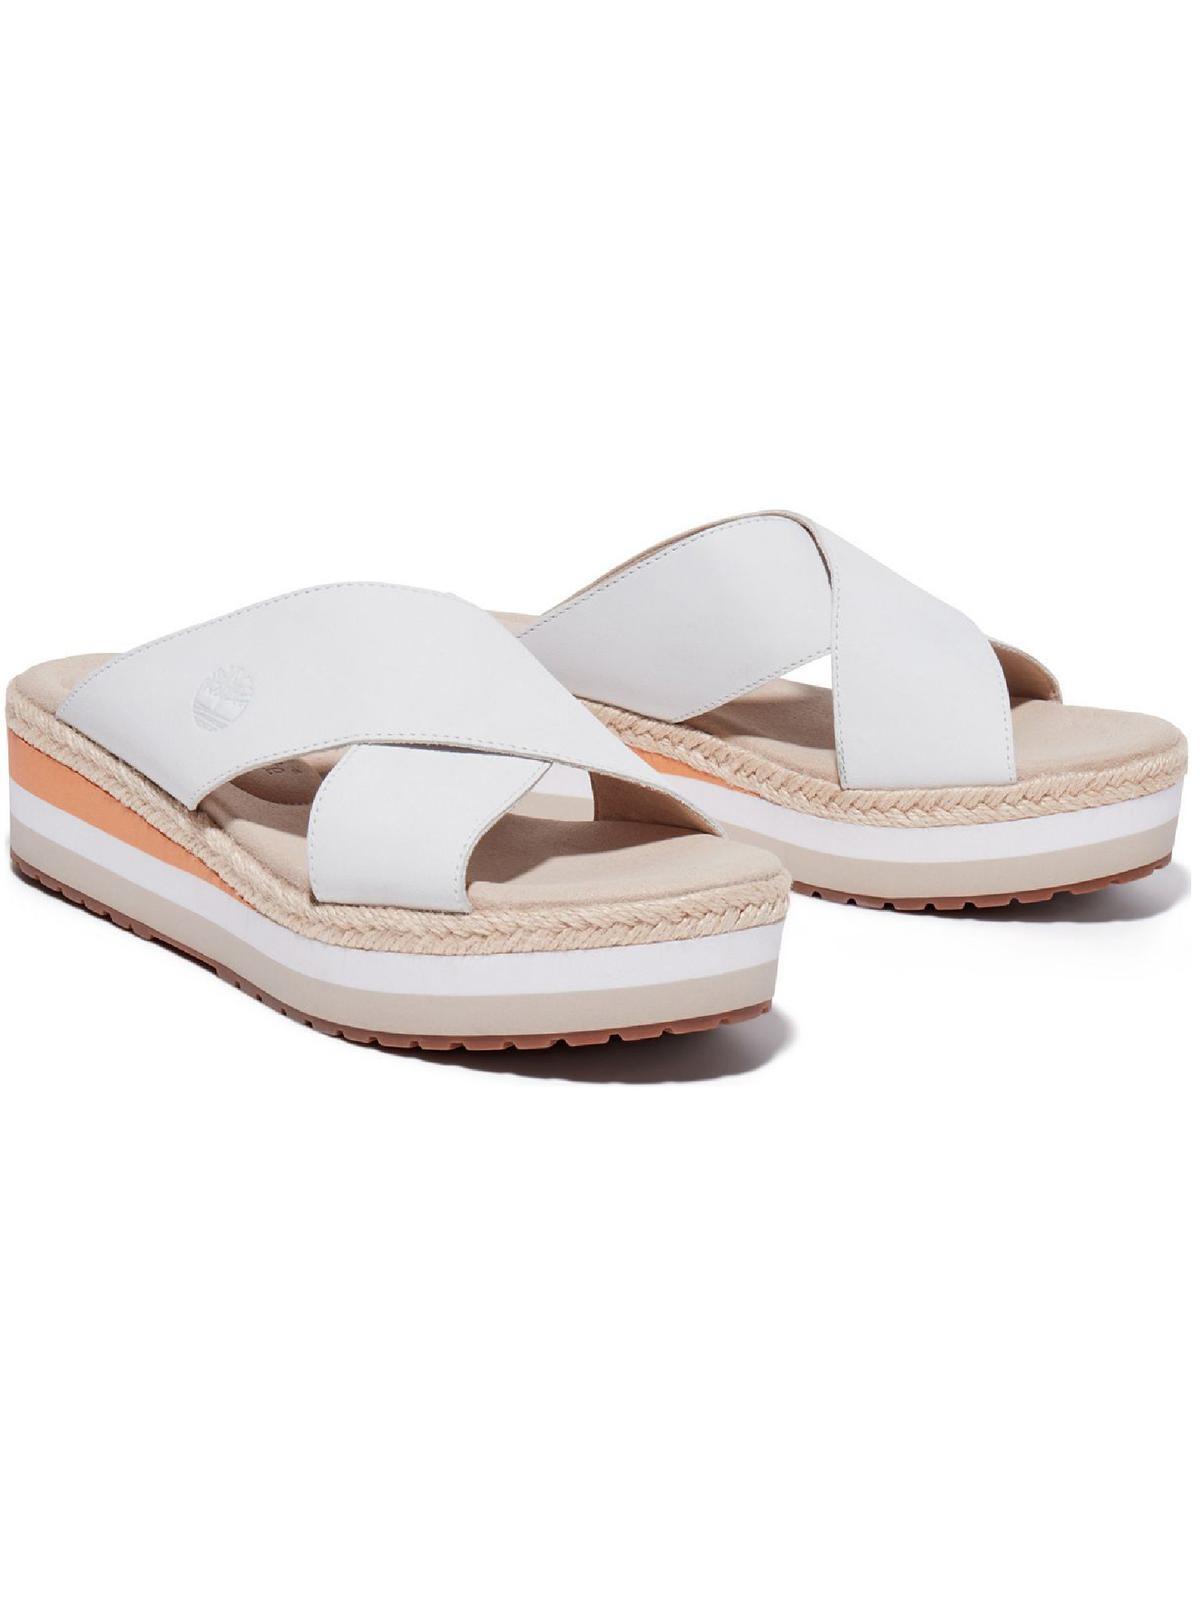 Timberland Santorini Leather Espadrille Mule Sandals in White | Lyst